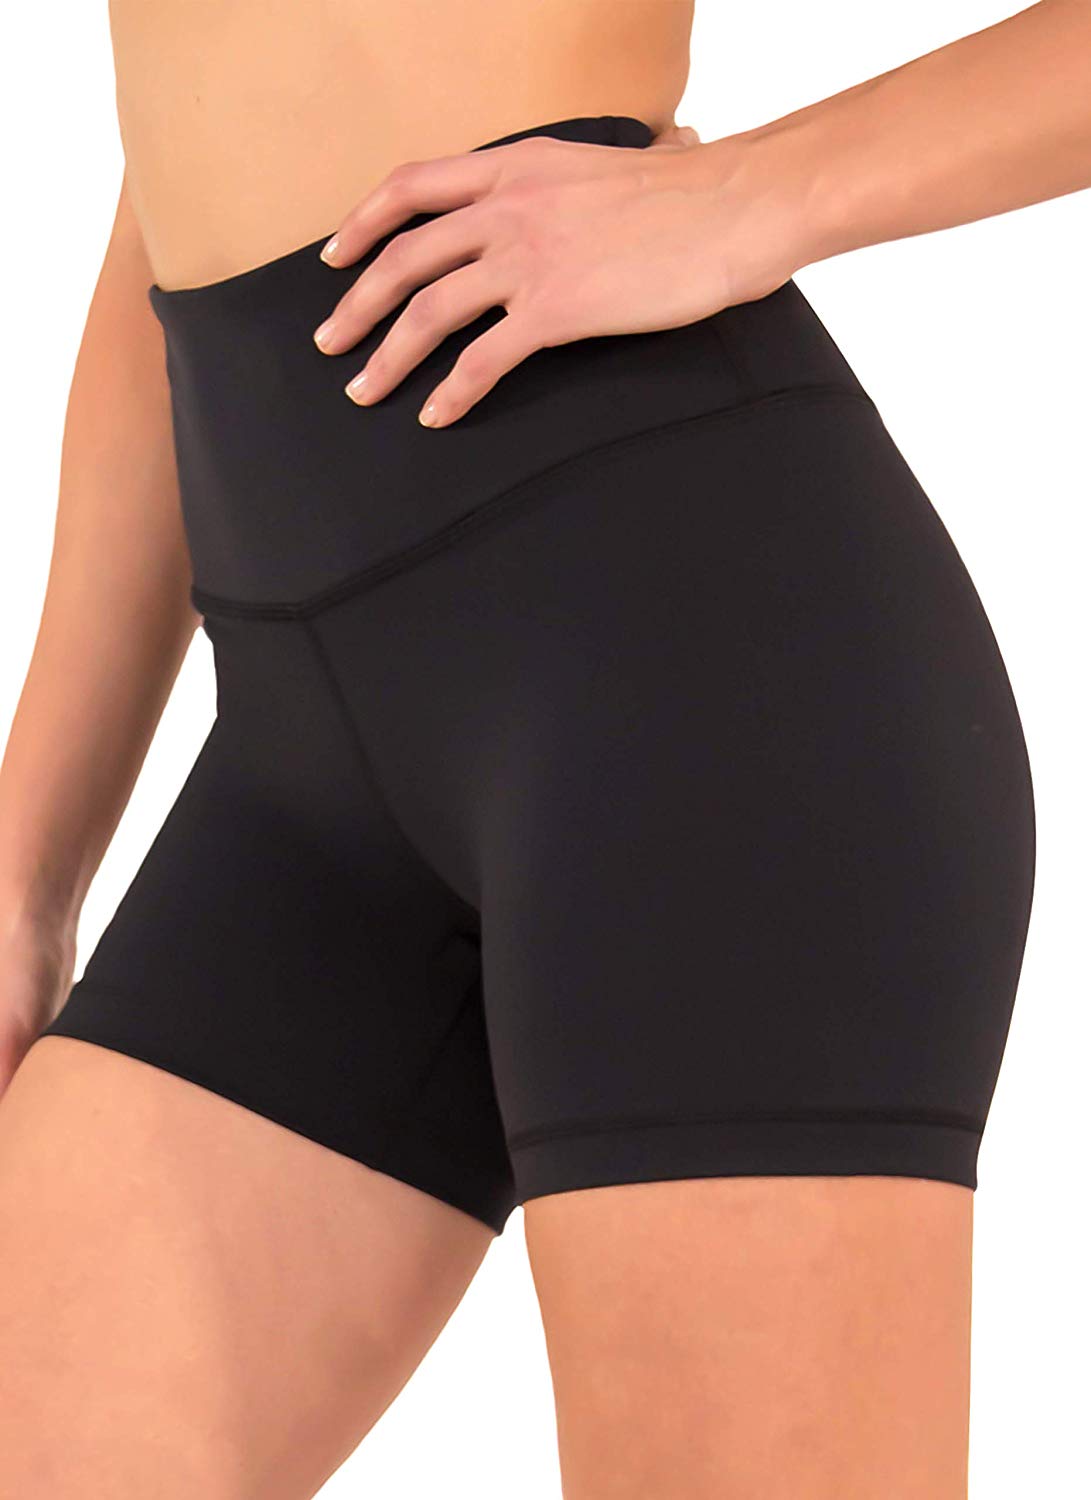 10 Best Yoga Shorts Reviewed in 2022 | TheGearHunt